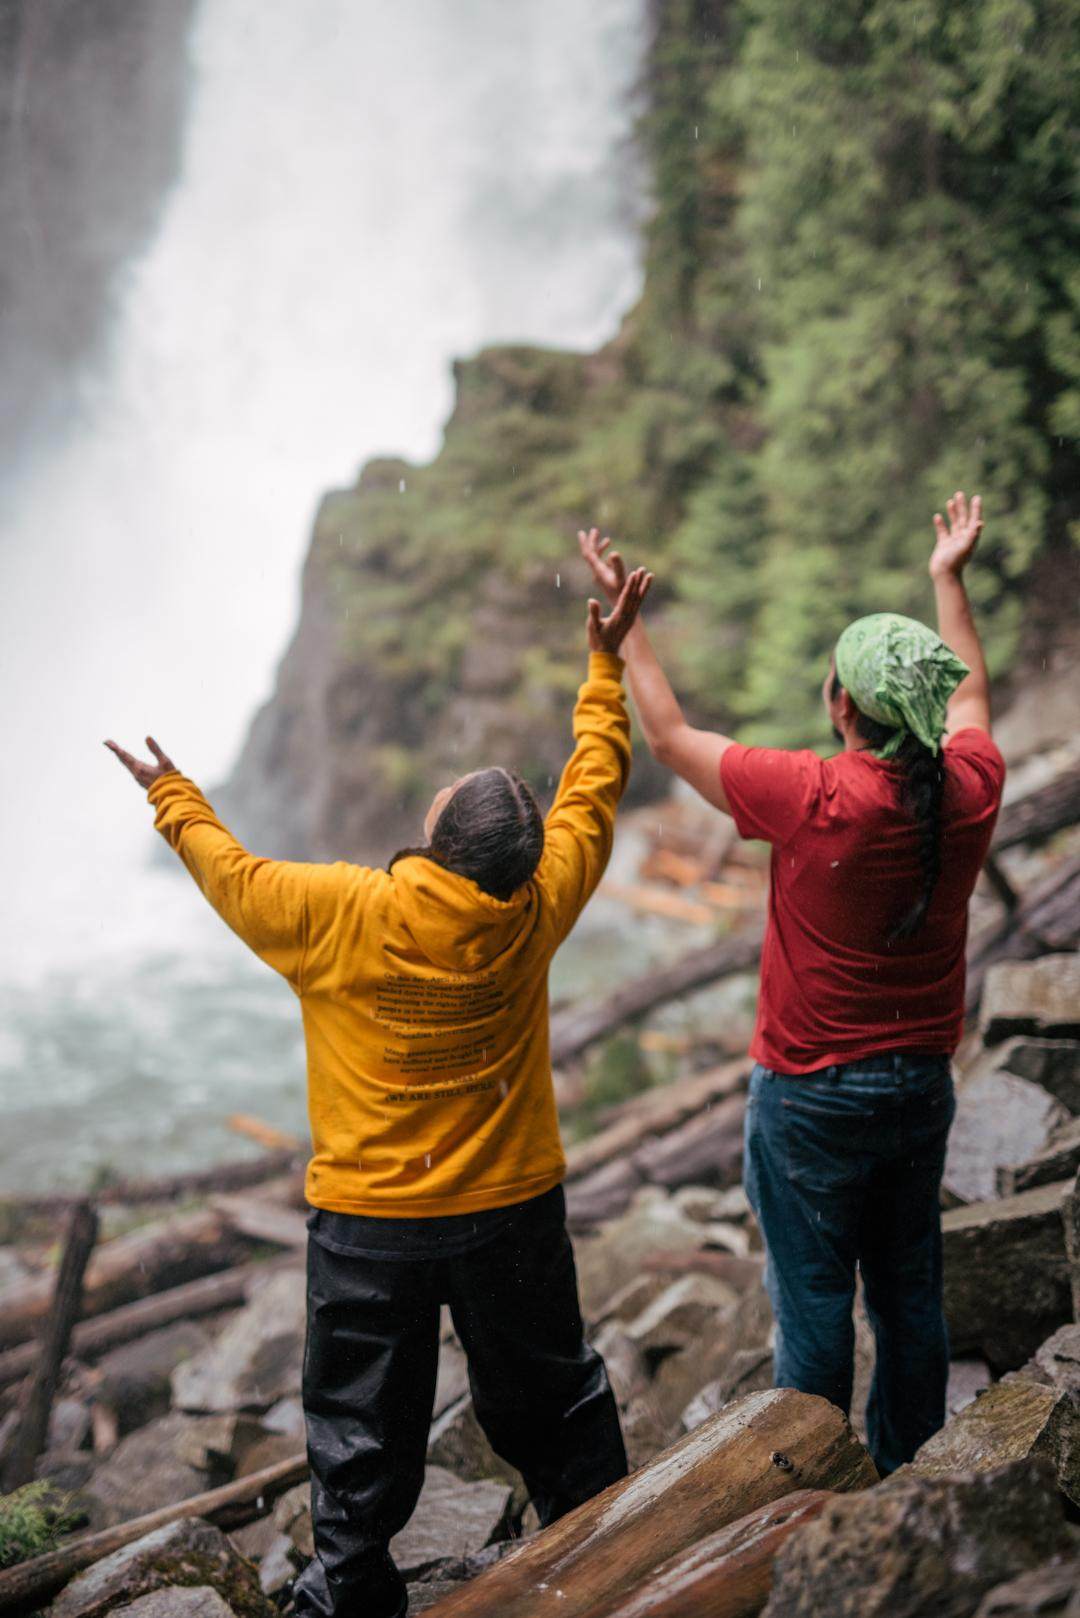 Two Sinixt people standing in front of waterfall with raised arms